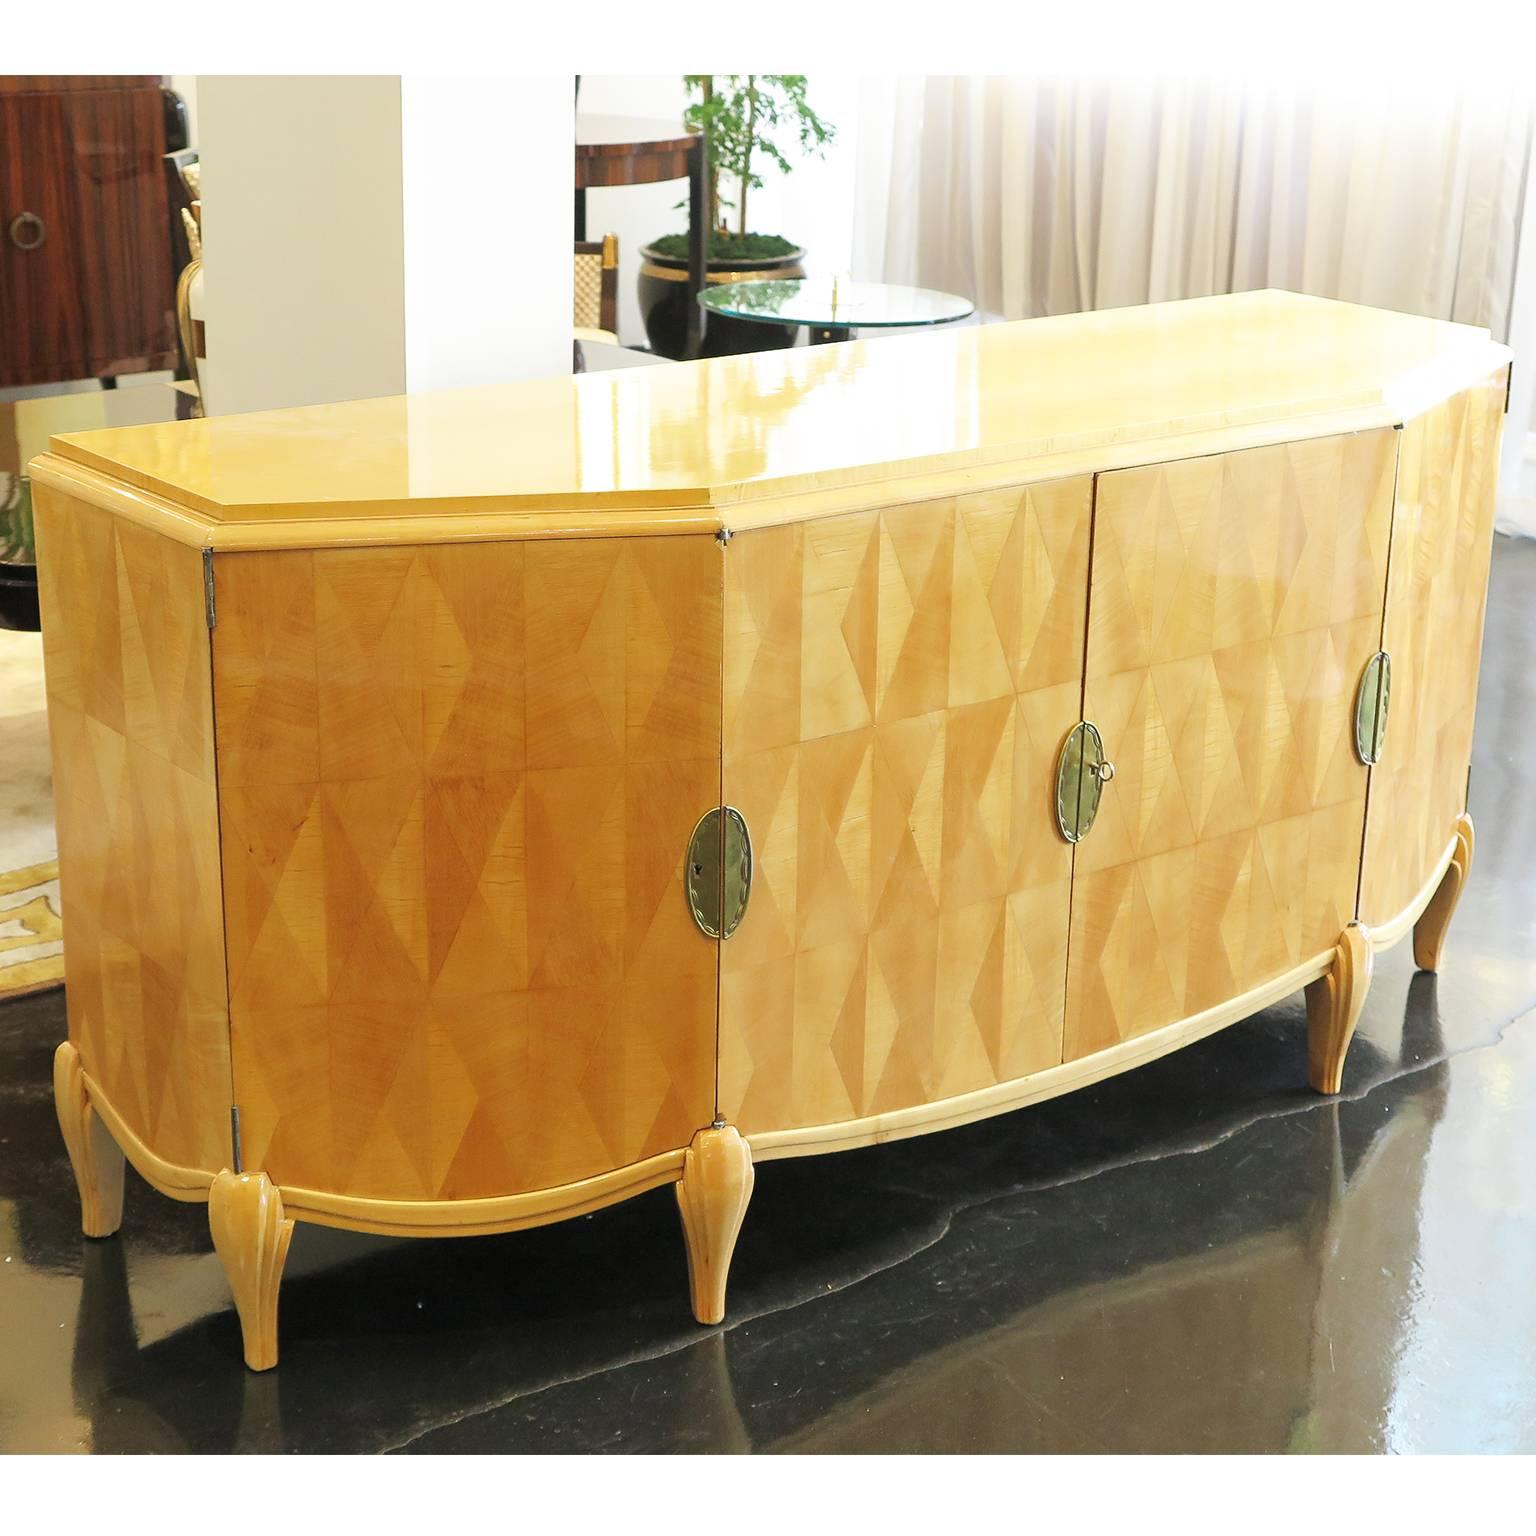 Beautiful 1920s sideboard by Pierre Lucas with an angled sycamore frame. Citron wood diamond parquetry decorates all four doors of this piece. Four oval relief brass hardware as keyholes with a scalloped design. Six beautiful carved legs support the